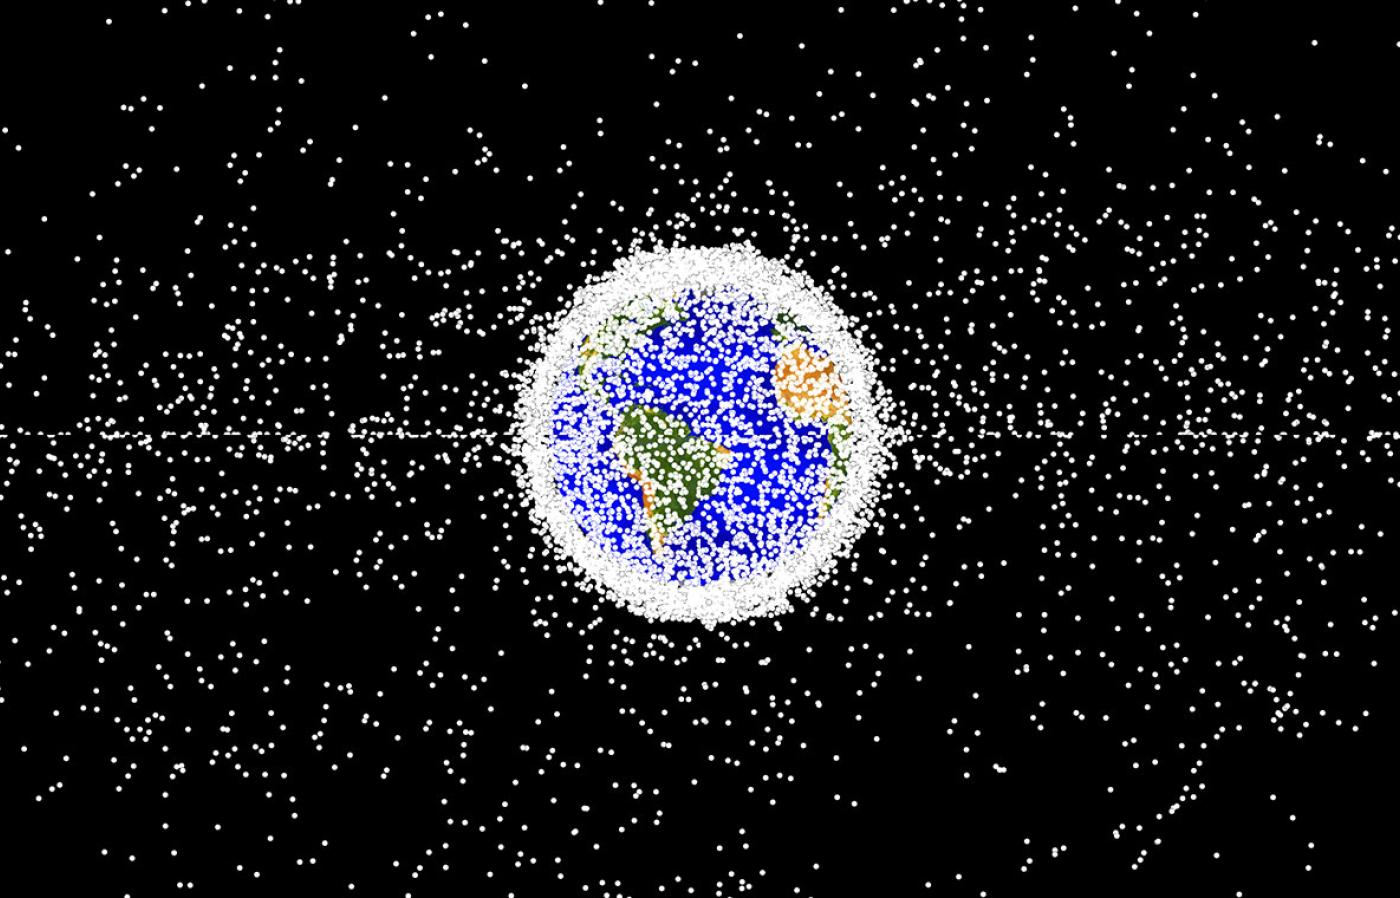 many many white dots clustered around Earth in space